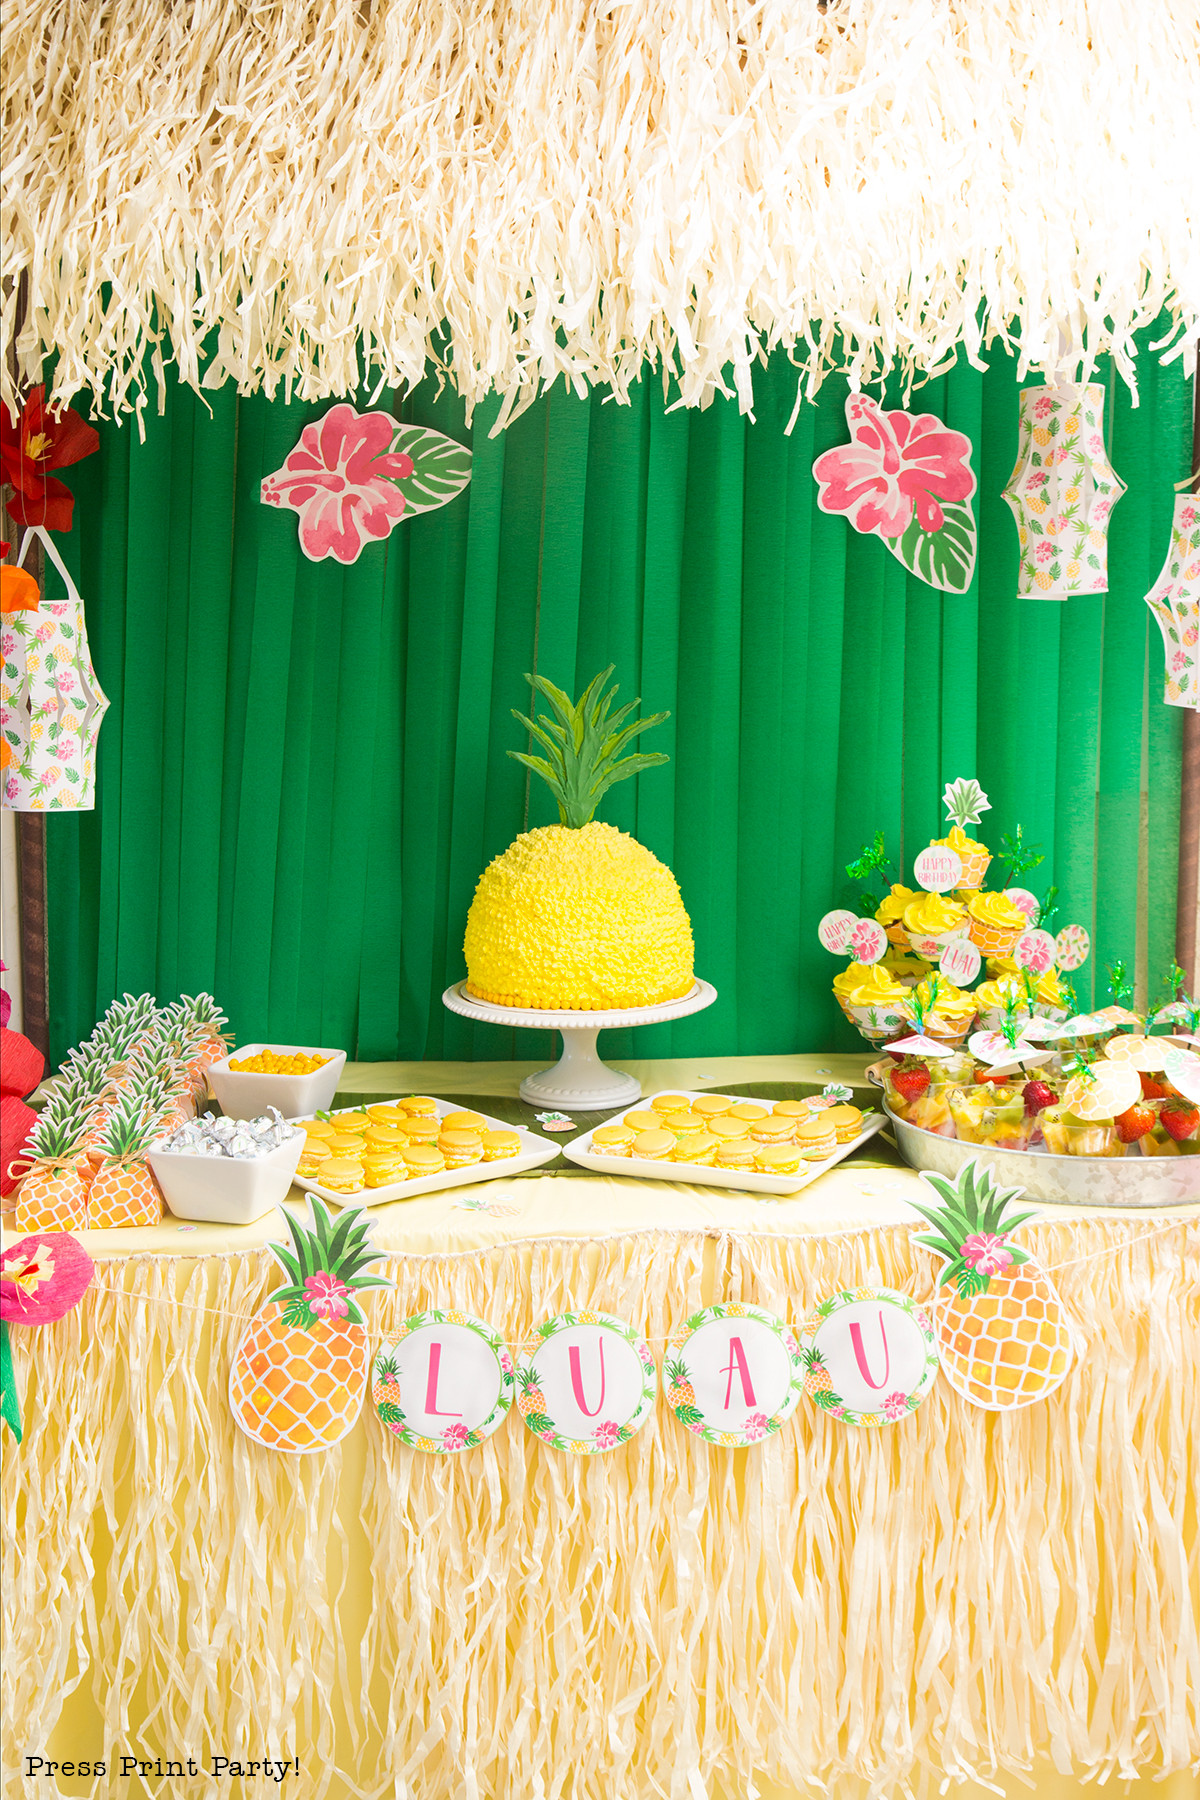 How To Decorate Birthday Party
 Sweet "Party Like a Pineapple " Birthday Party Luau